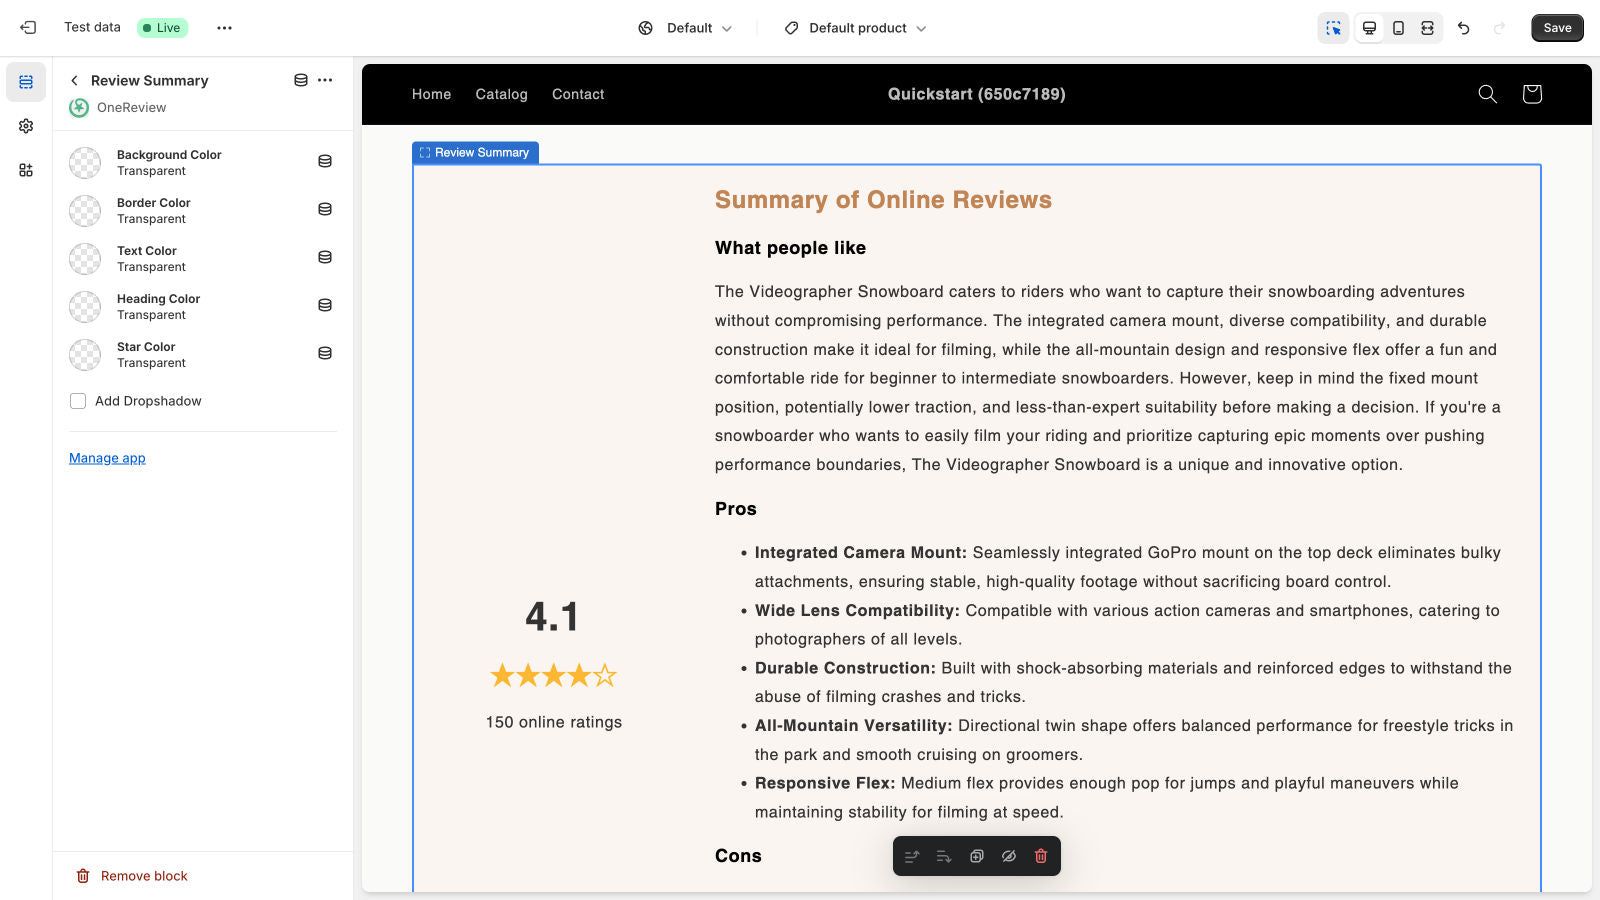 Adding the review summary section to your theme